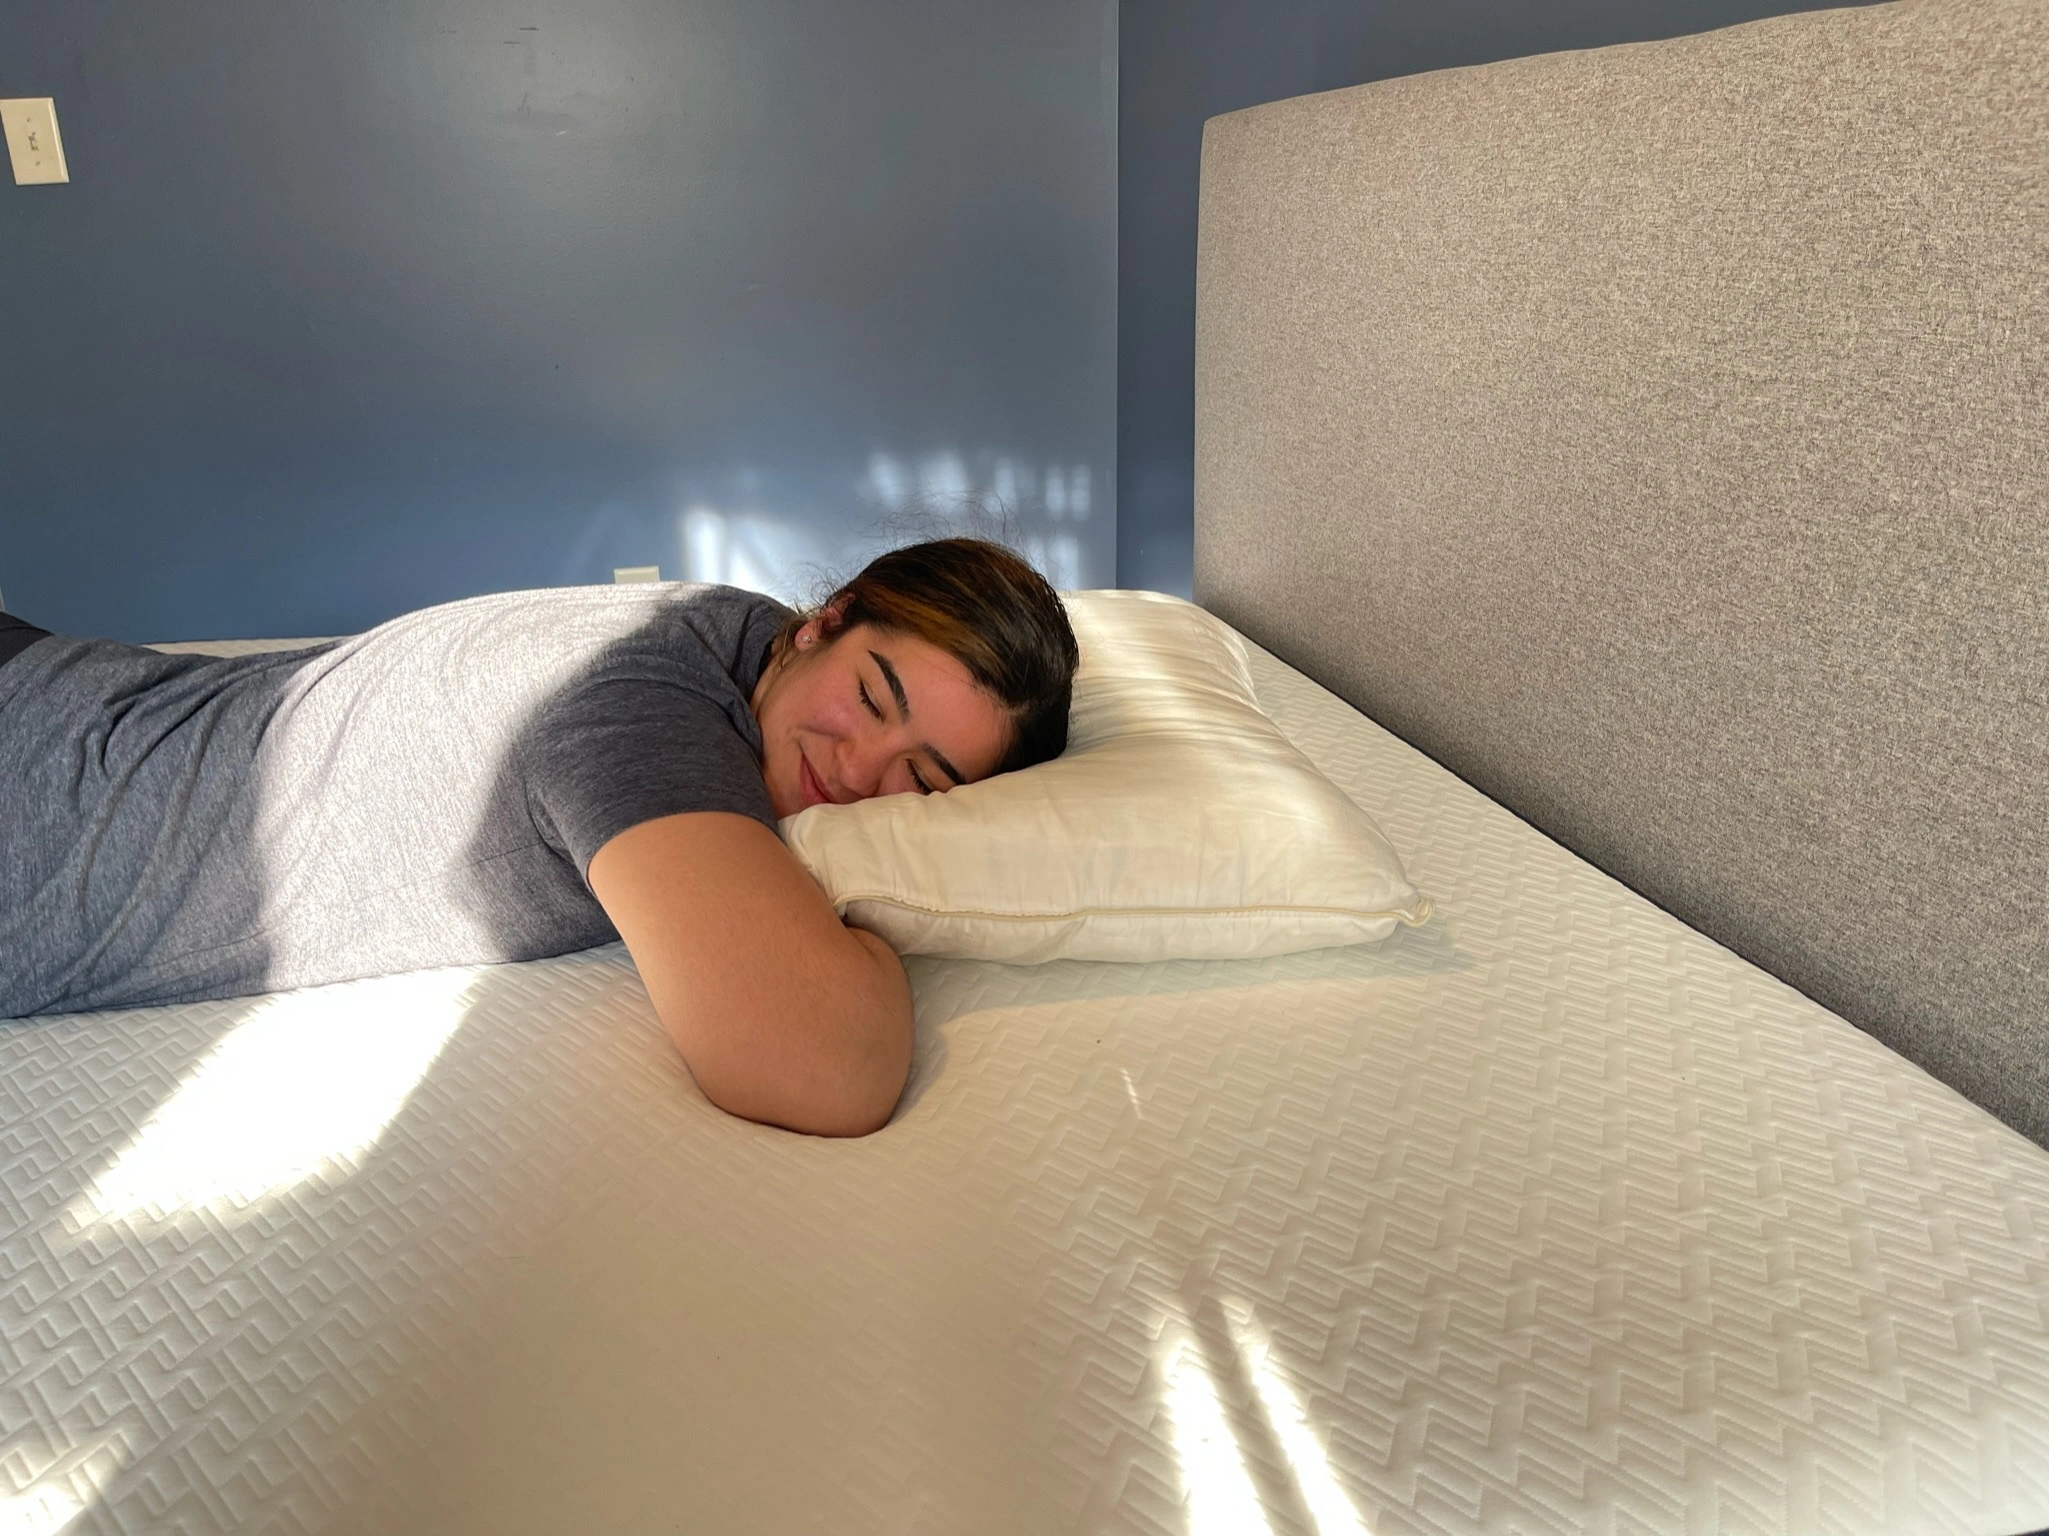 Sleepiverse reviewer testing the pressure relief of the BedInABox Mattress.